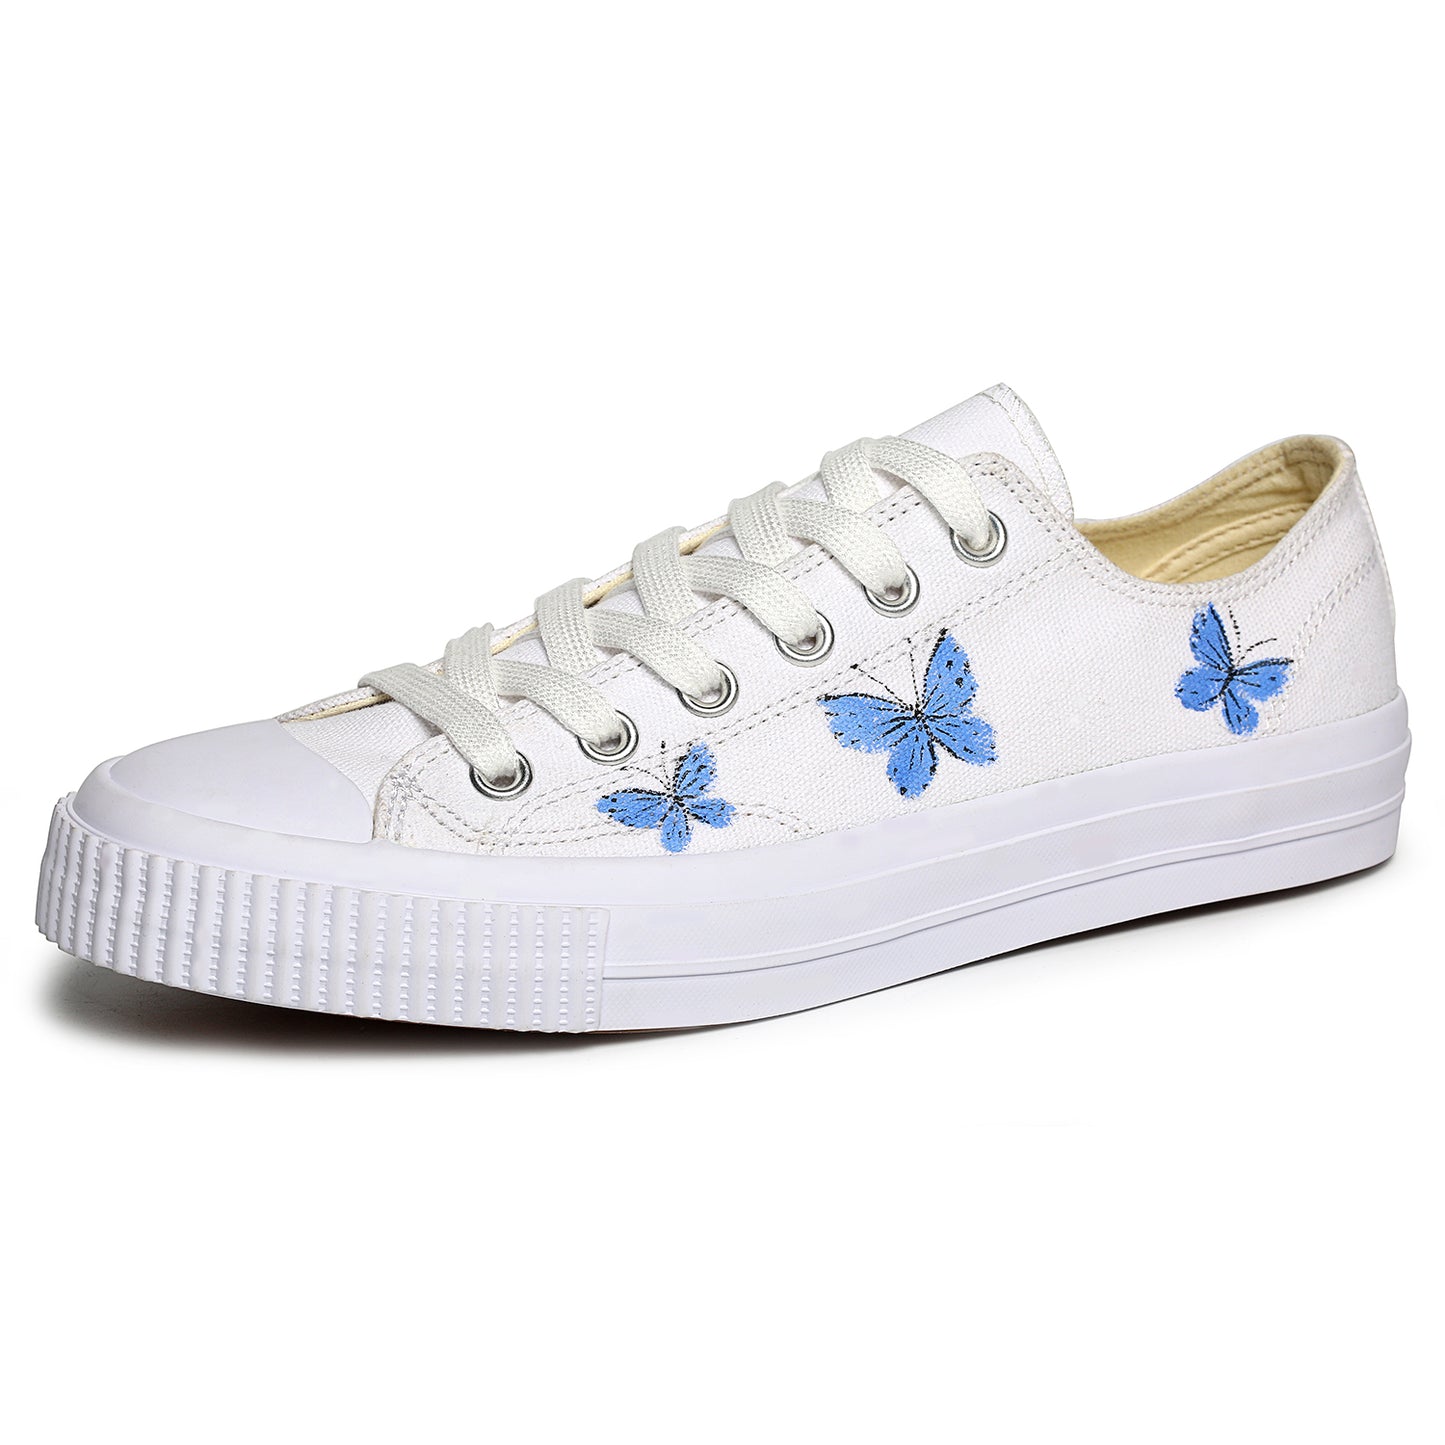 Women’s Hand Painted Canvas Shoes Art Painted Canvas Flats Sneakers